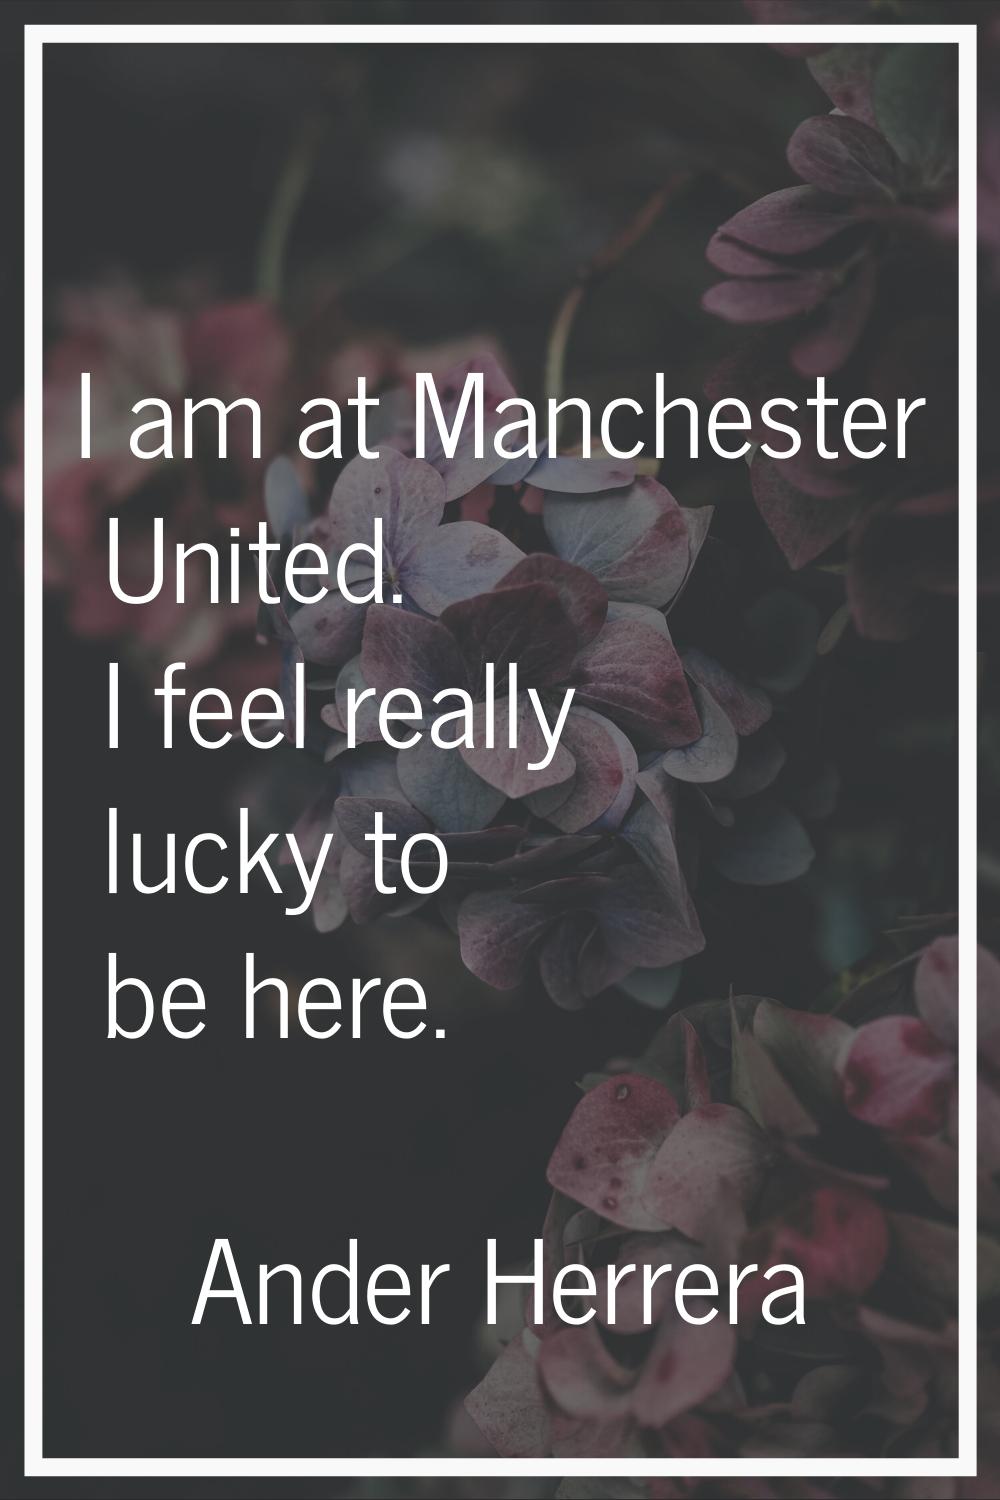 I am at Manchester United. I feel really lucky to be here.